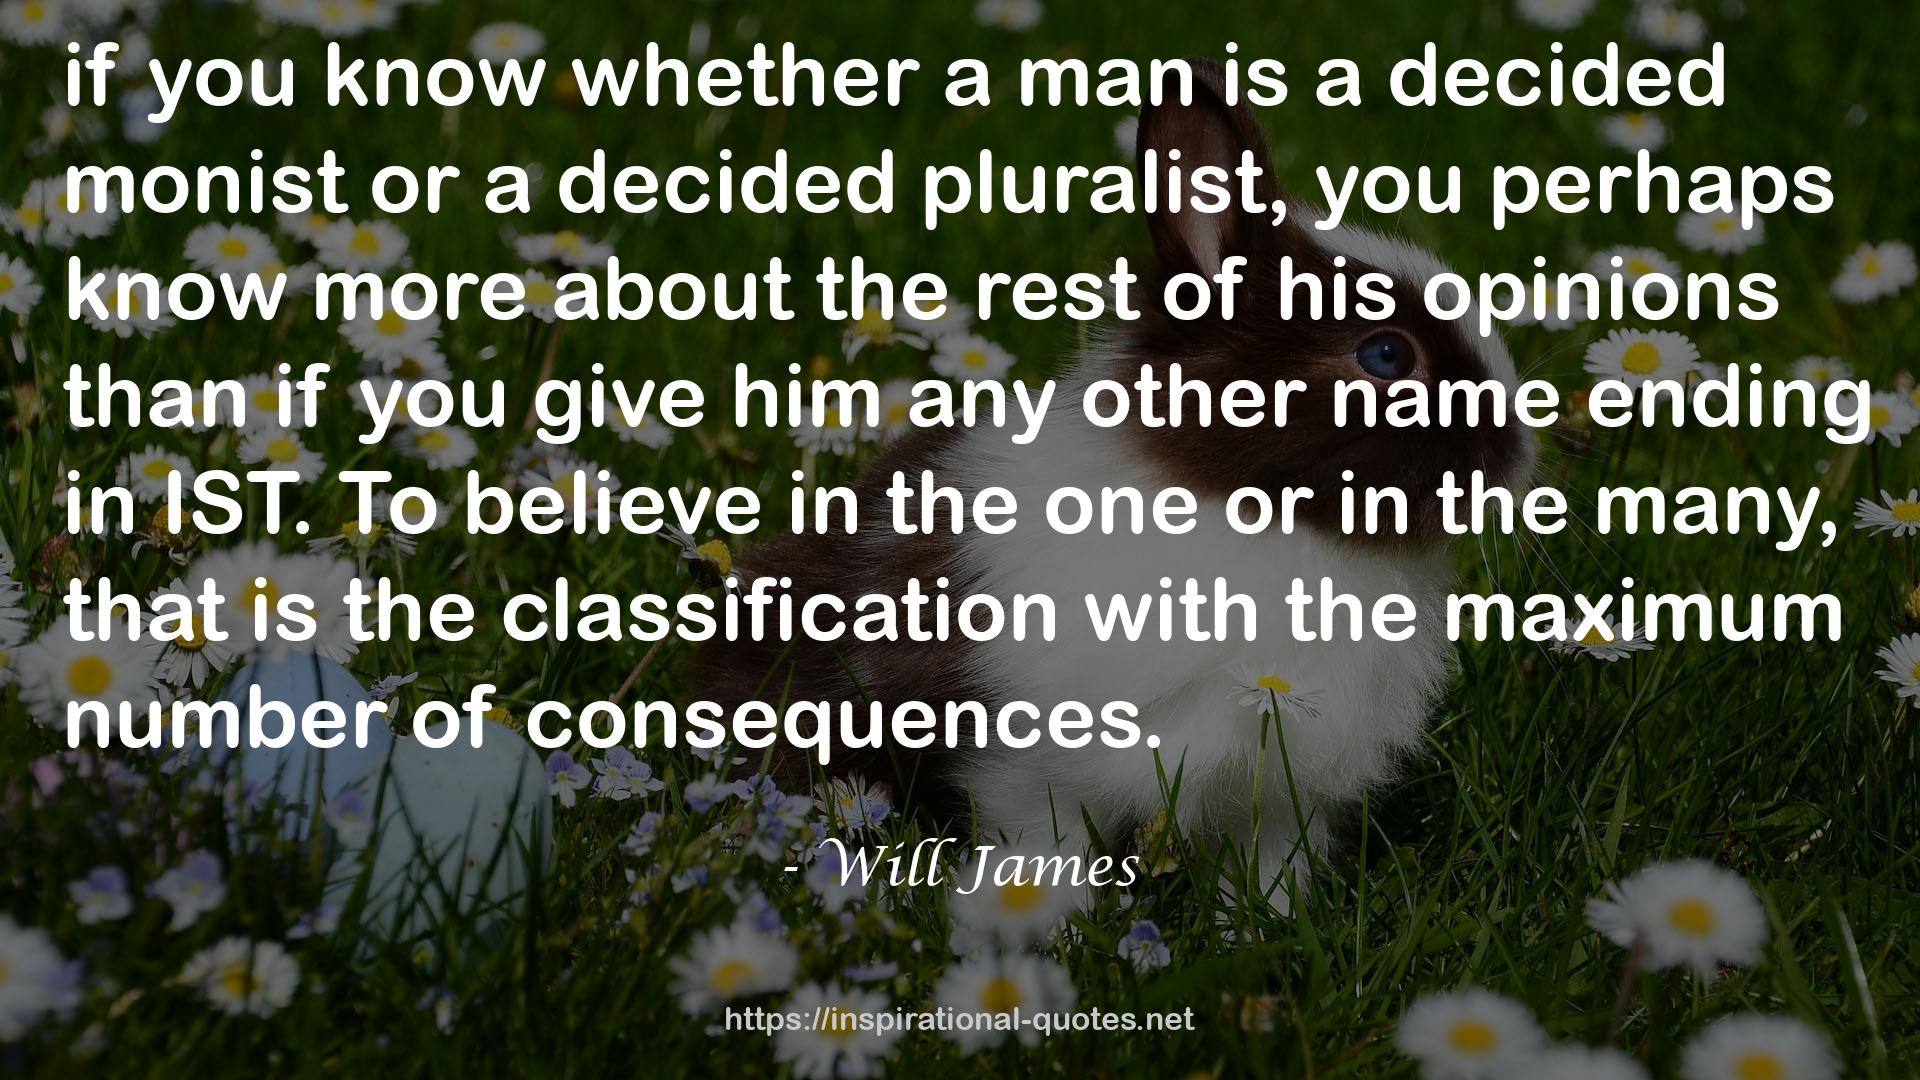 Will James QUOTES